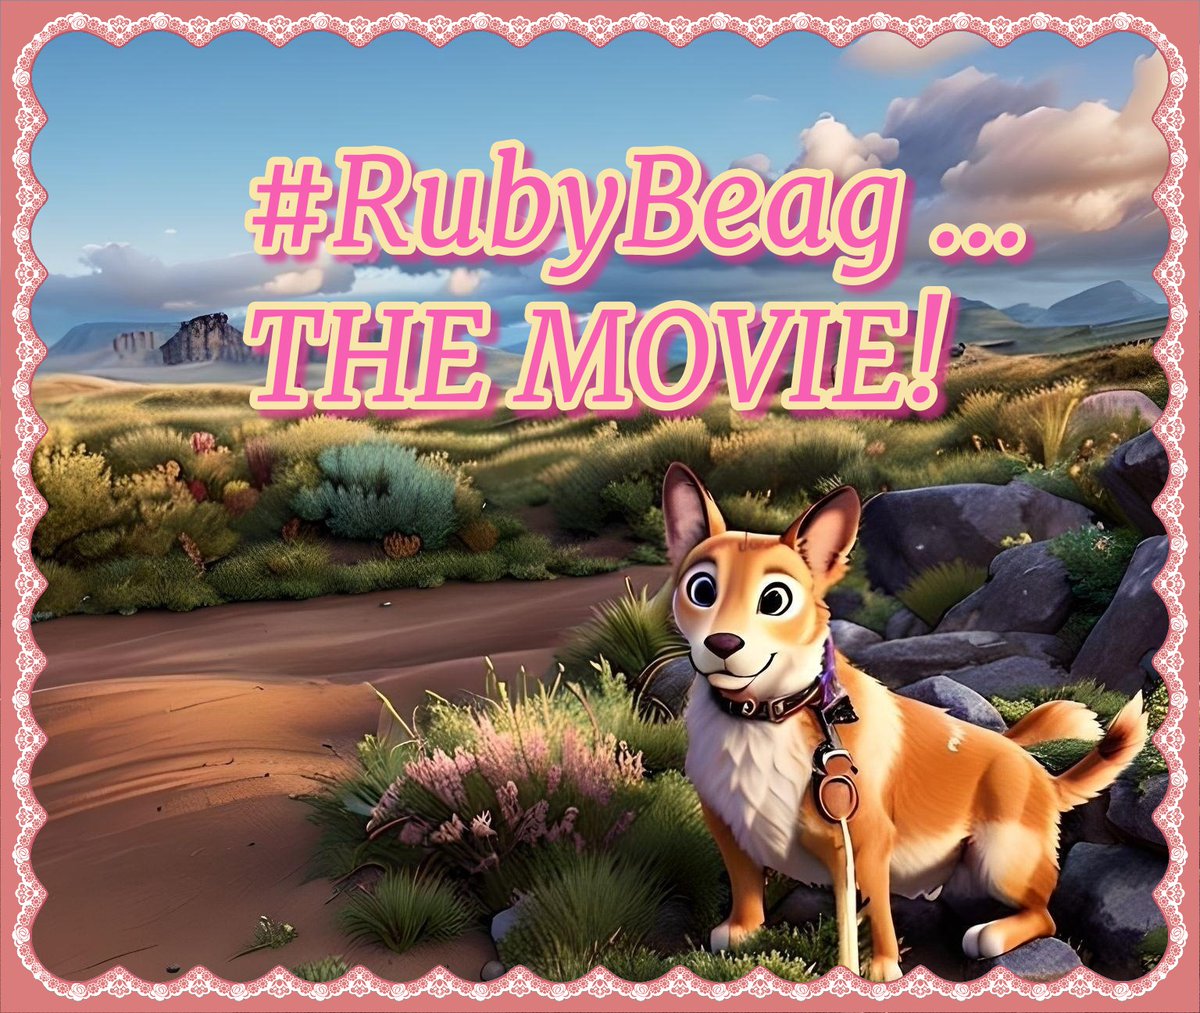 @Lalavande33 @ThePhotoHour Good morning Kathy and of course film star #RubyBeag ♥